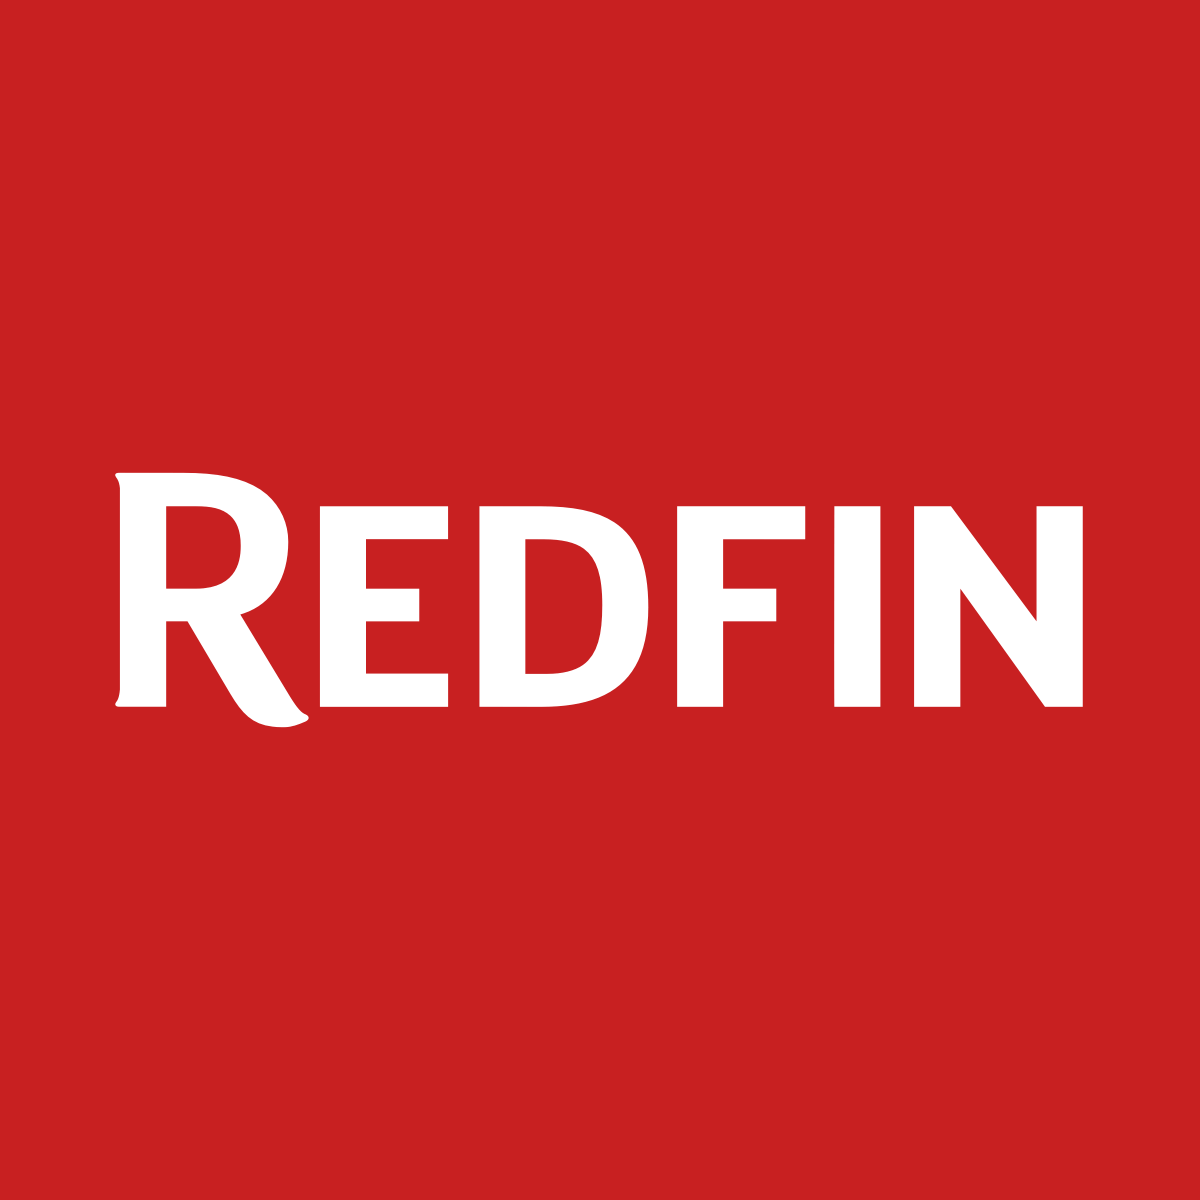 Redfin Article North Carolina Home Inspection